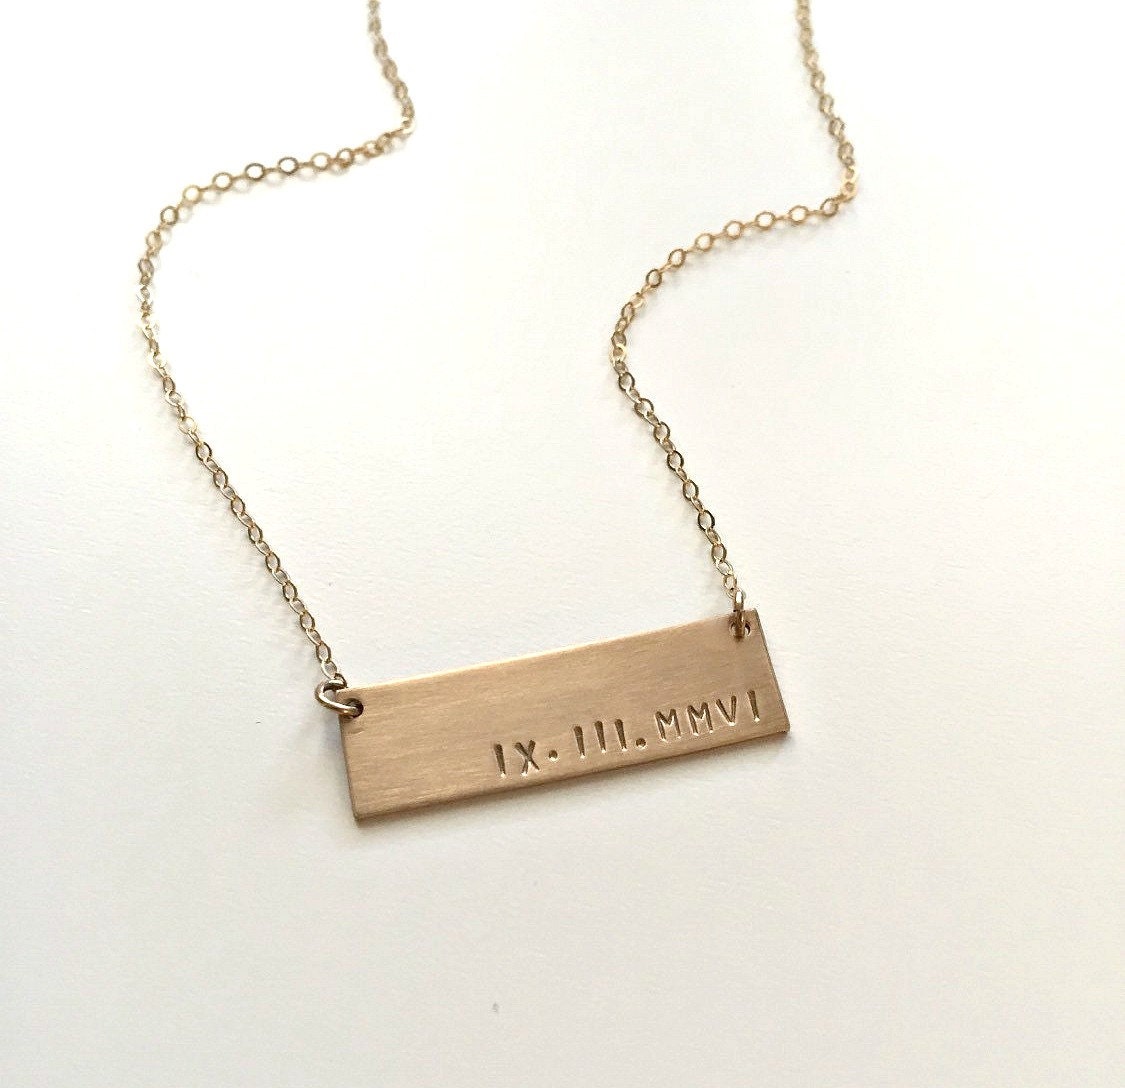 Custom Gold Bar Name Necklace Roman Numeral Date Bar | Etsy